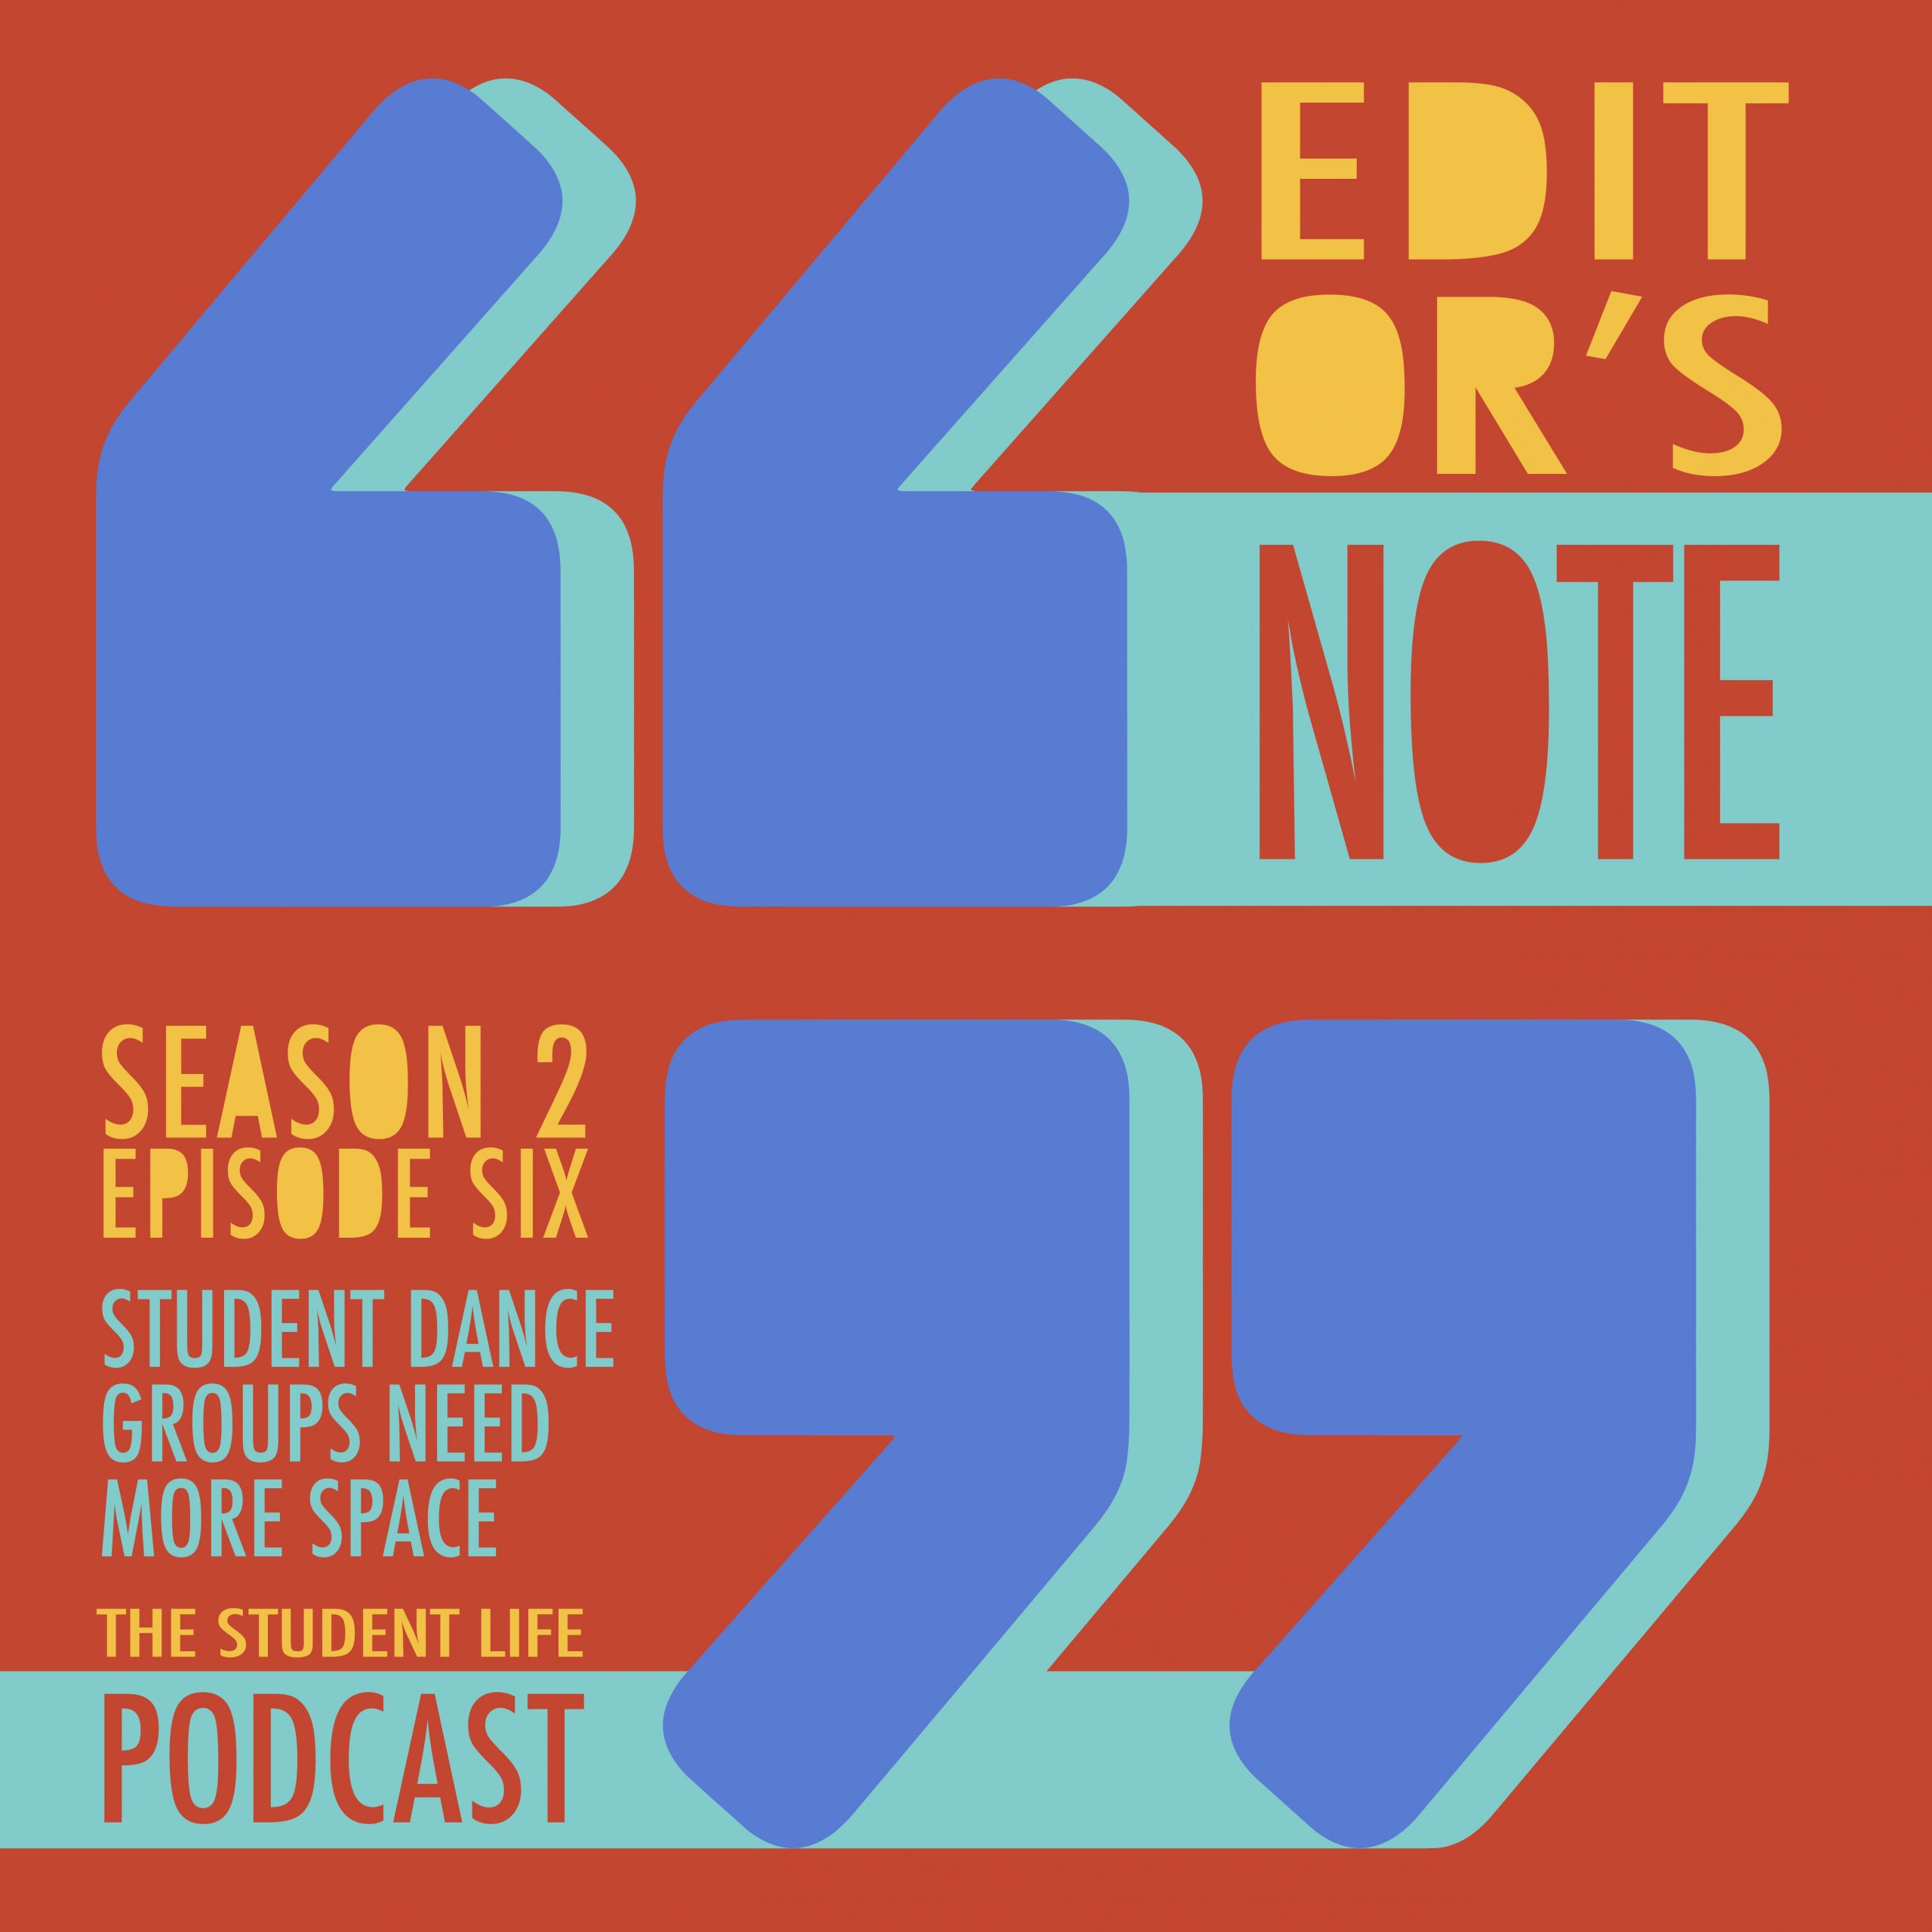 A graphic with two large blue quotation marks in the center in front of an orange background. In the upper right hand corner, orange and green letters read "Editor's Note." In the lower left hand corner, purple and green letters read "Dance Groups Need More Space" and "The Student Life Podcast."